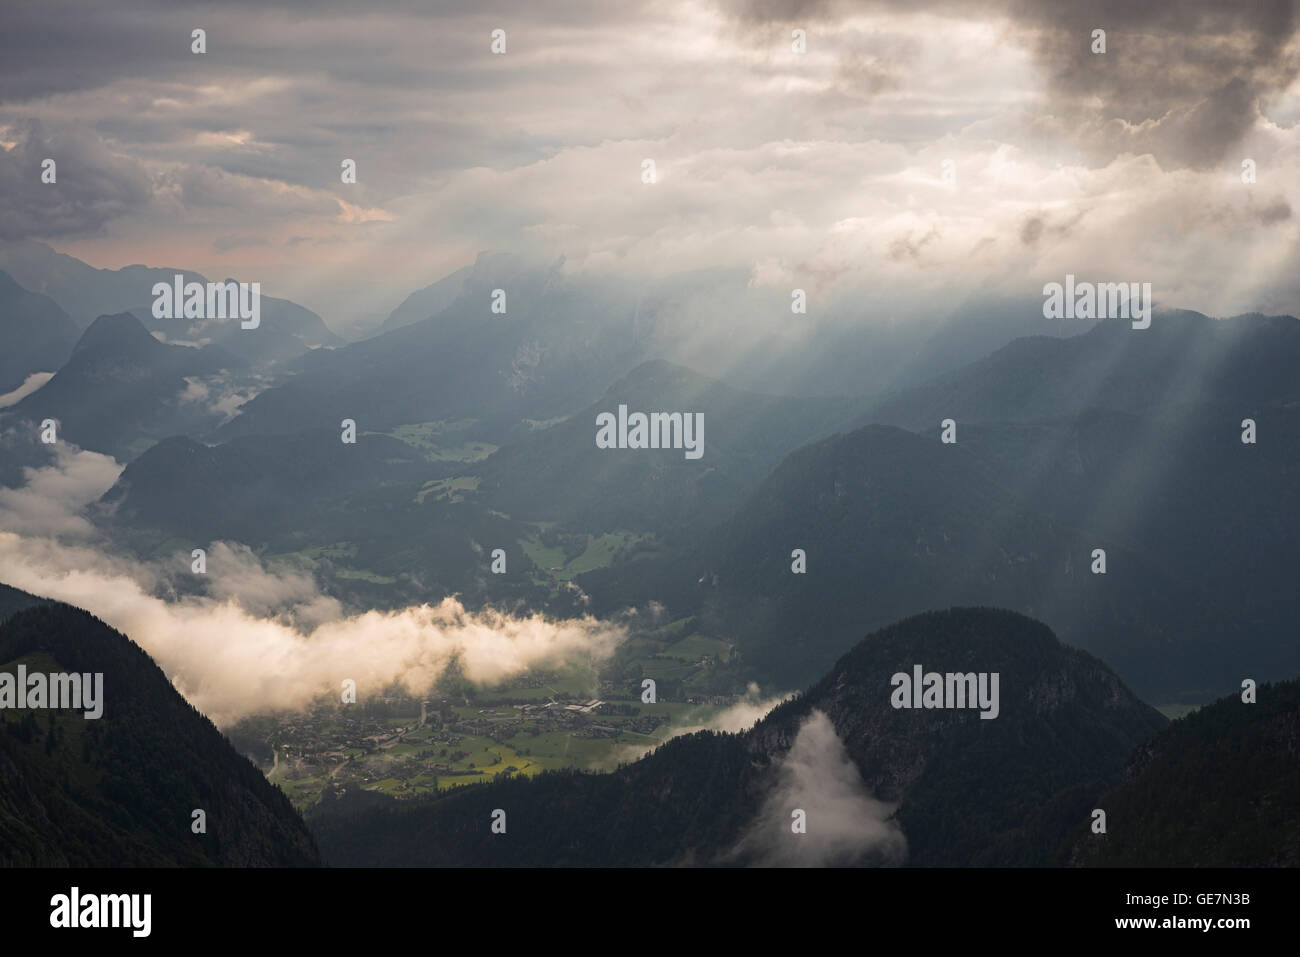 Dramatic sky with sunrays and rain clouds over Lofer town and Reiteralpe mountains in the European Alps, Salzburg, Austria Stock Photo